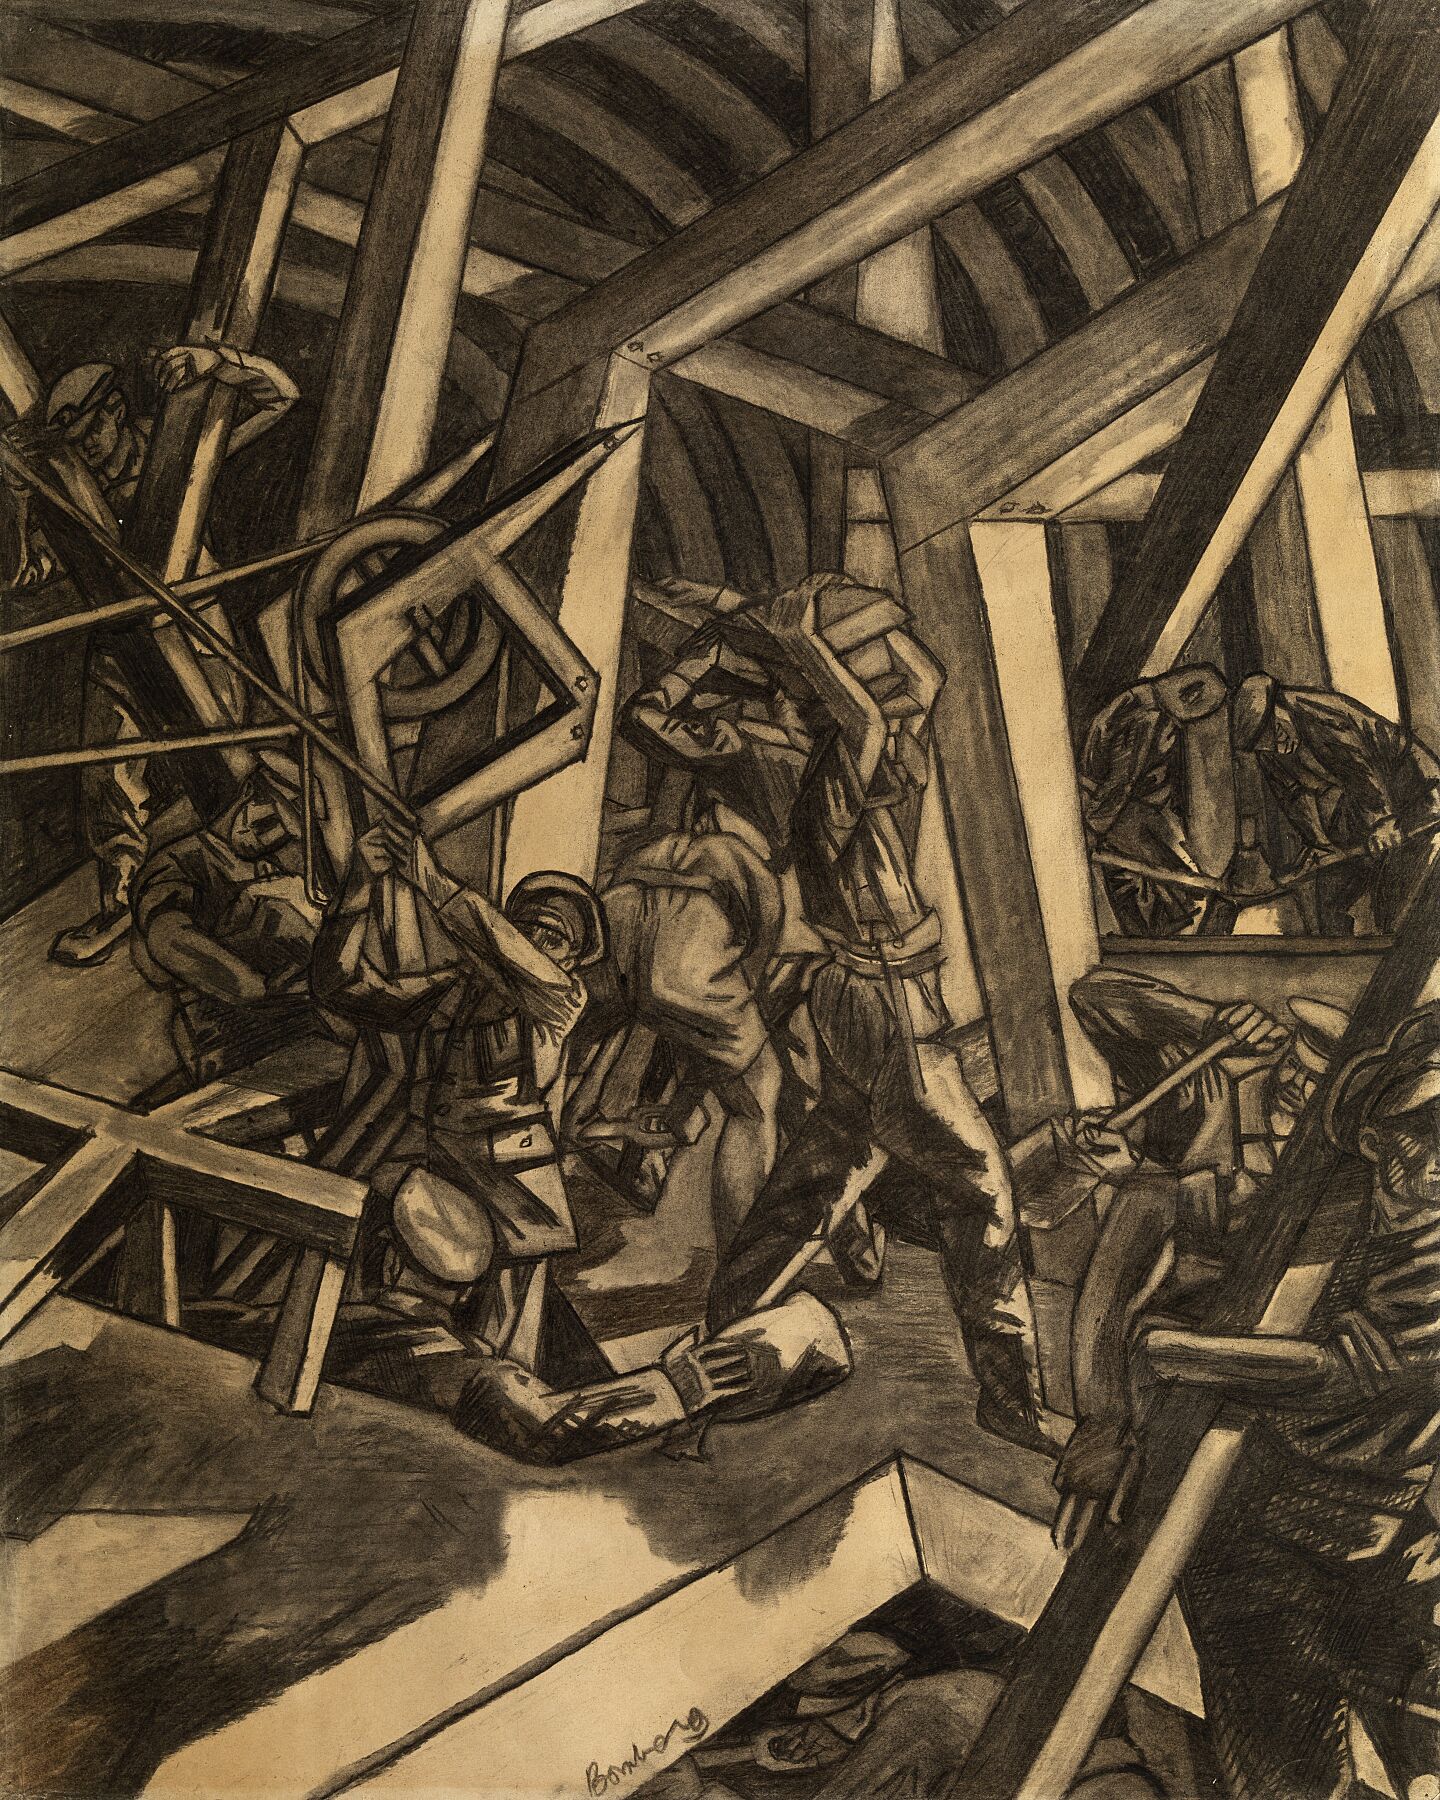 Sappers at Work by David Bomberg - c.1918–19